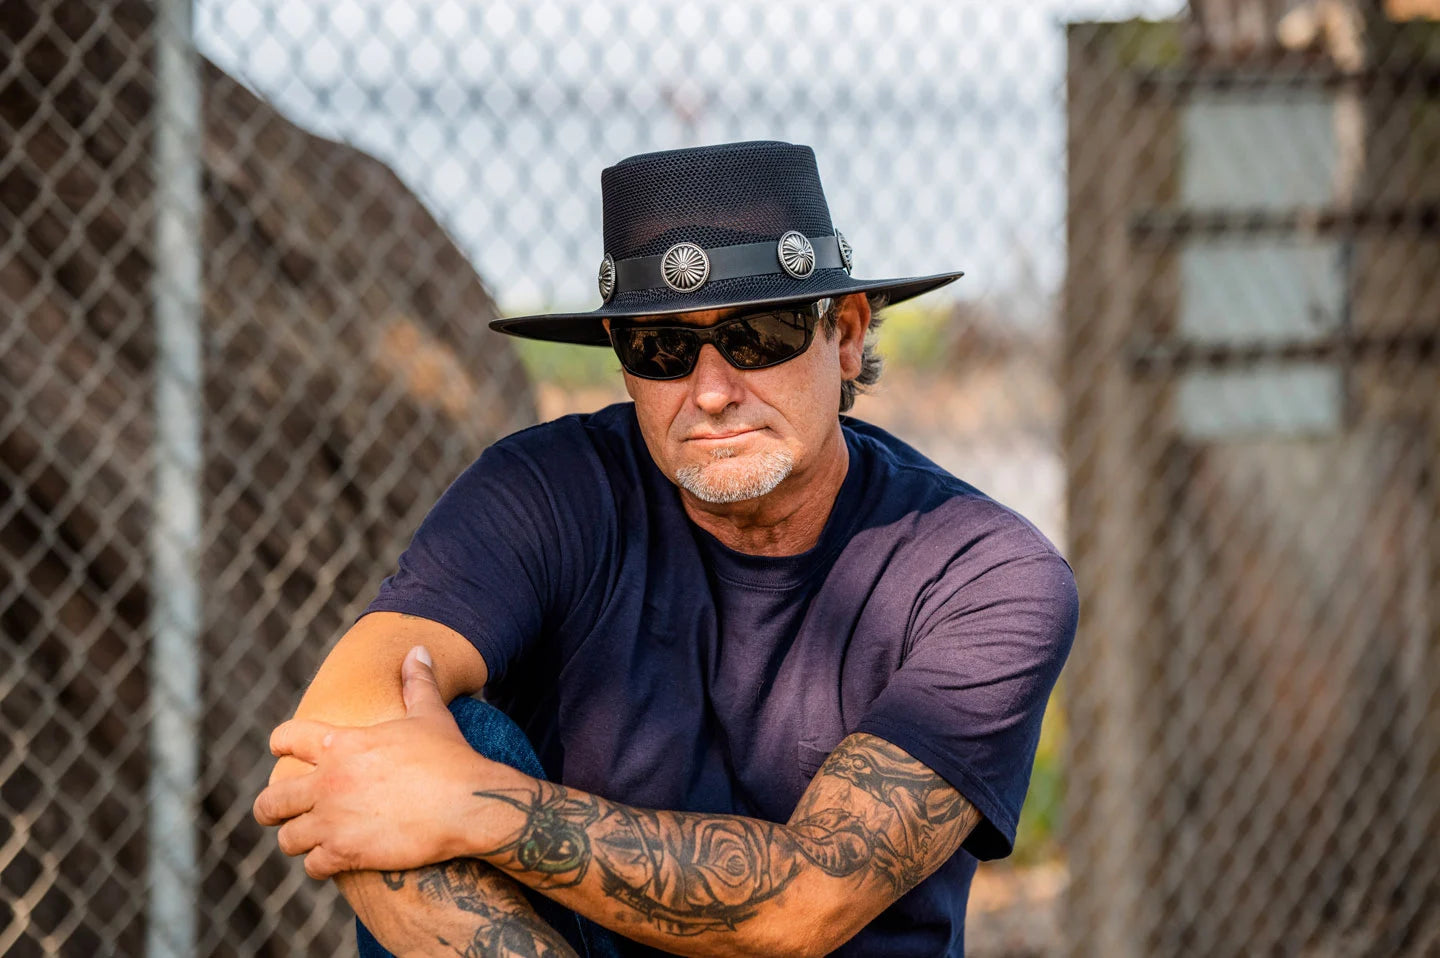 man with arm tattoos wearing a blue shirt and a black boater hat by american hat makers